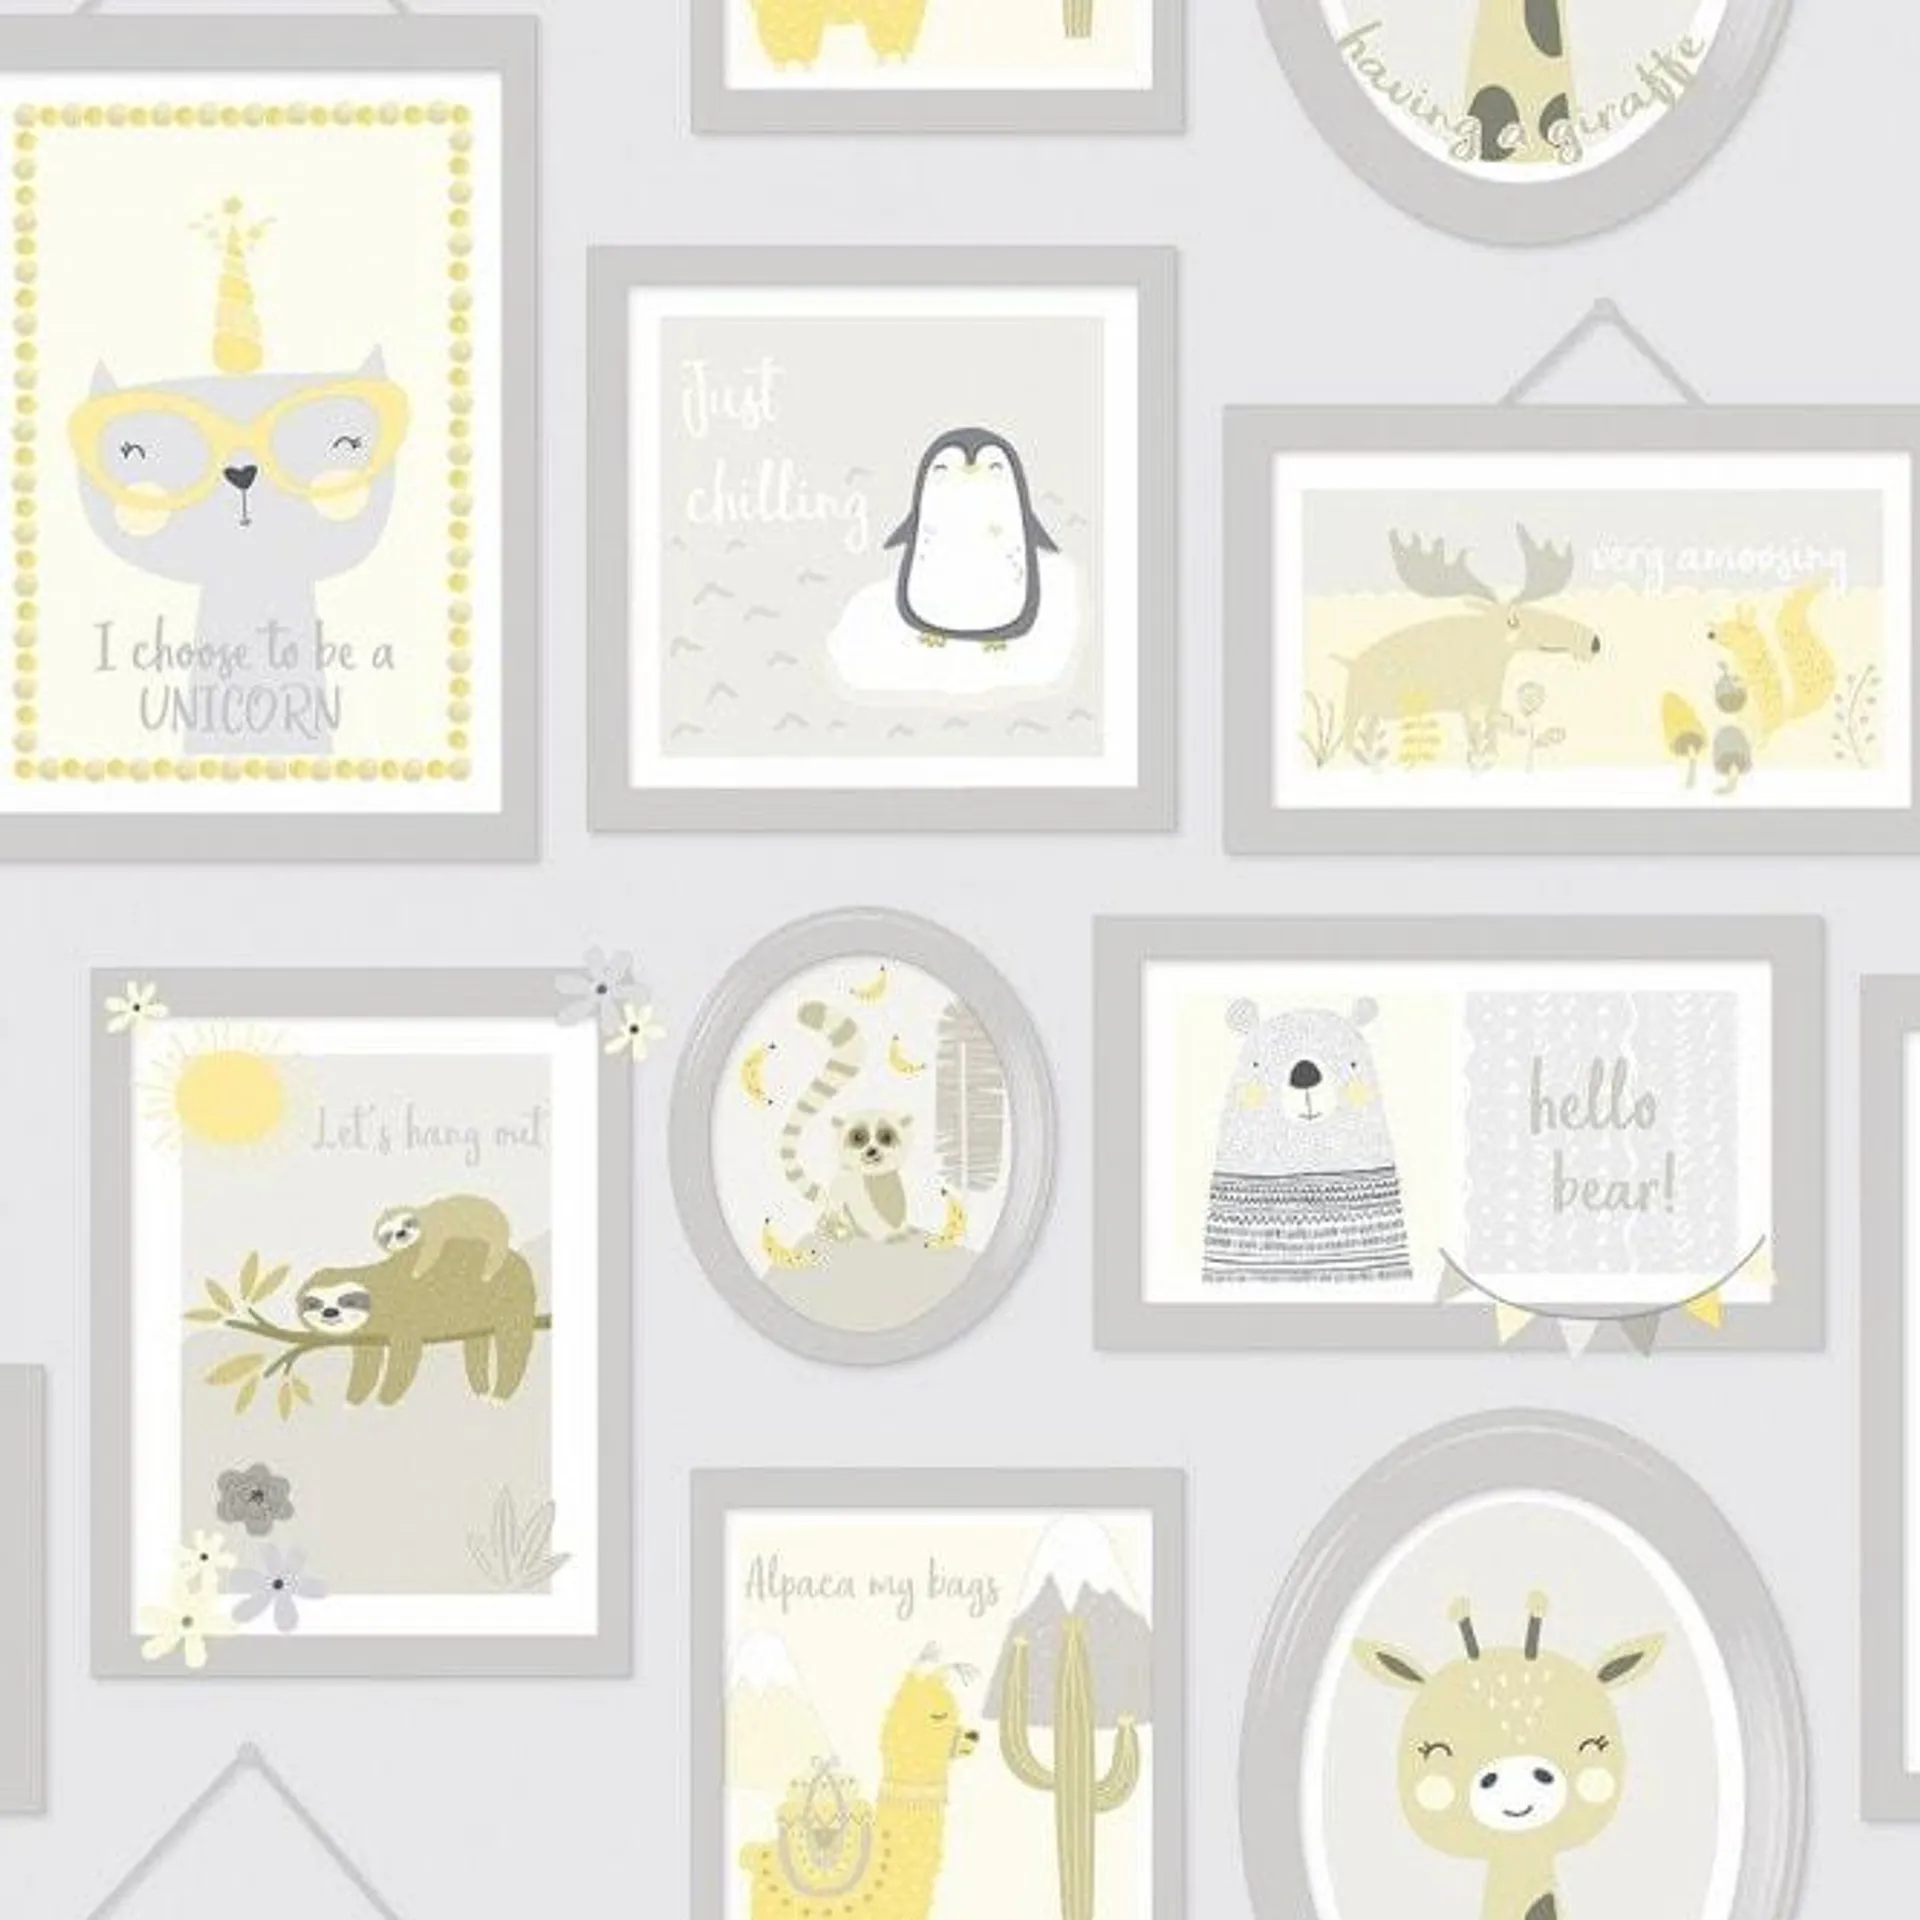 Pet Portraits Childrens Frames Wallpaper in Yellow and Grey